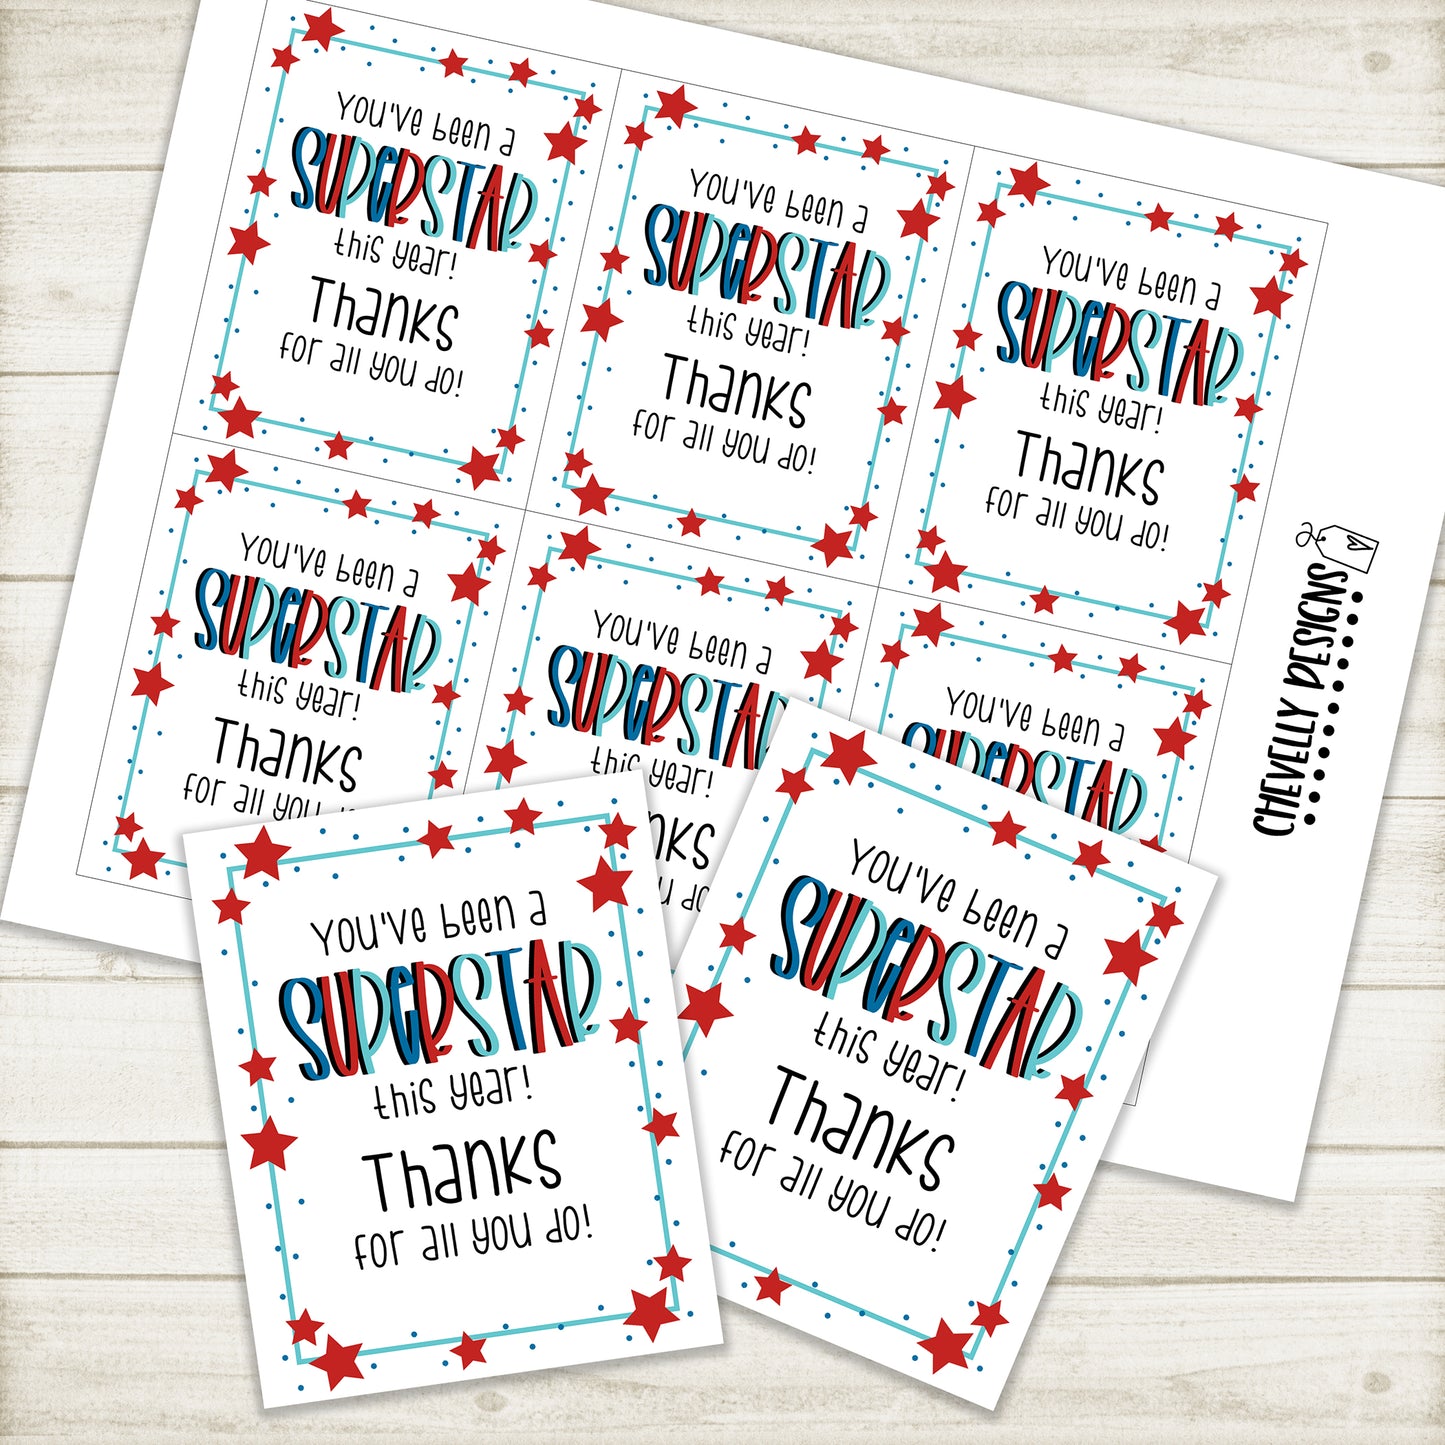 You've been a Superstar this Year - Appreciation Gift Tags >>>Instant Digital Download<<<